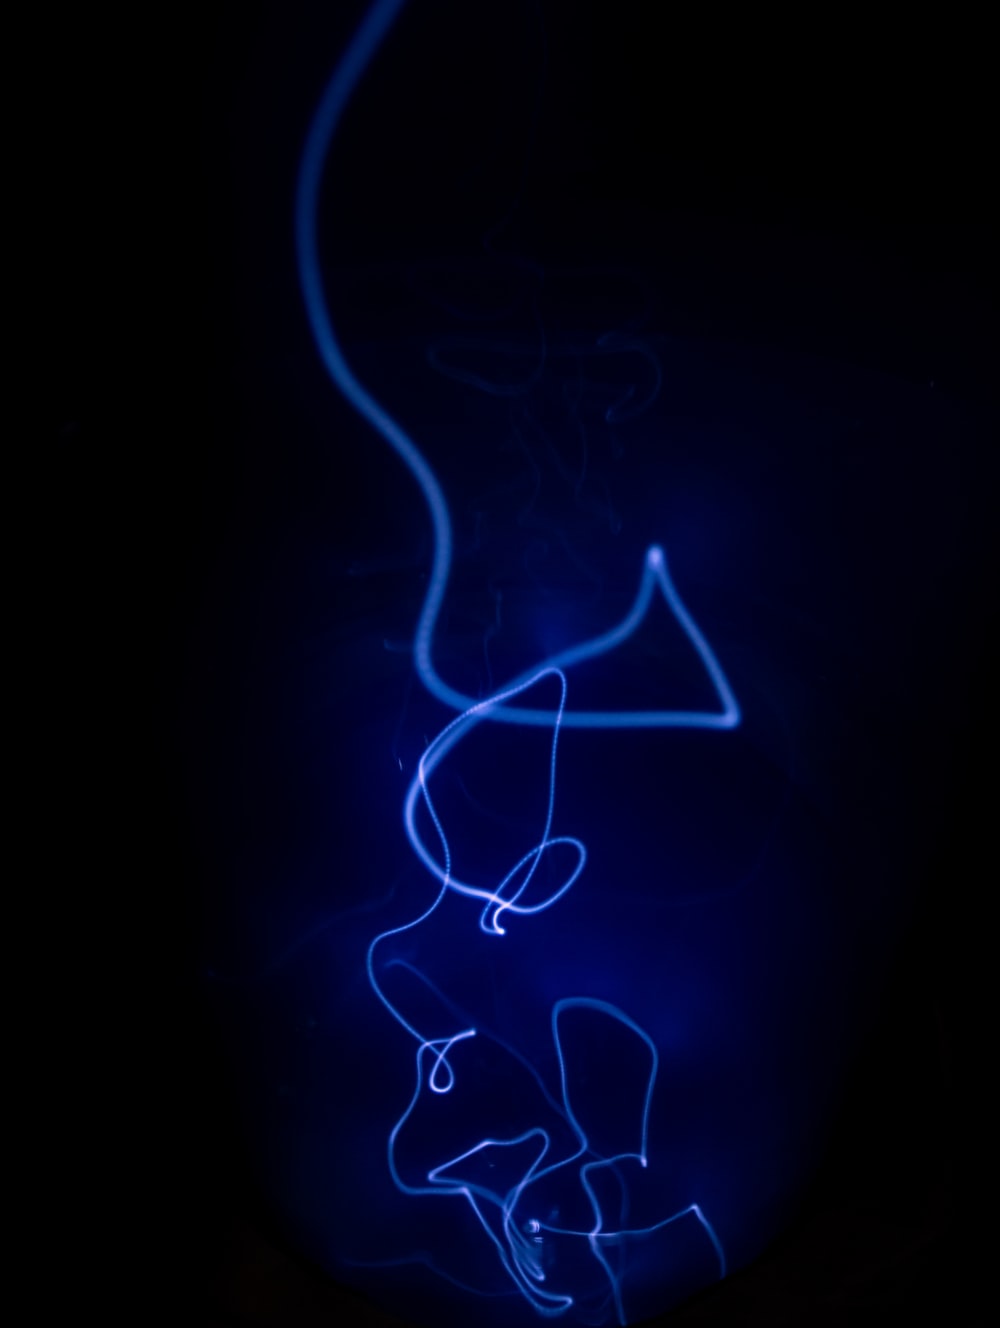 Blue Lights Picture. Download Free Image